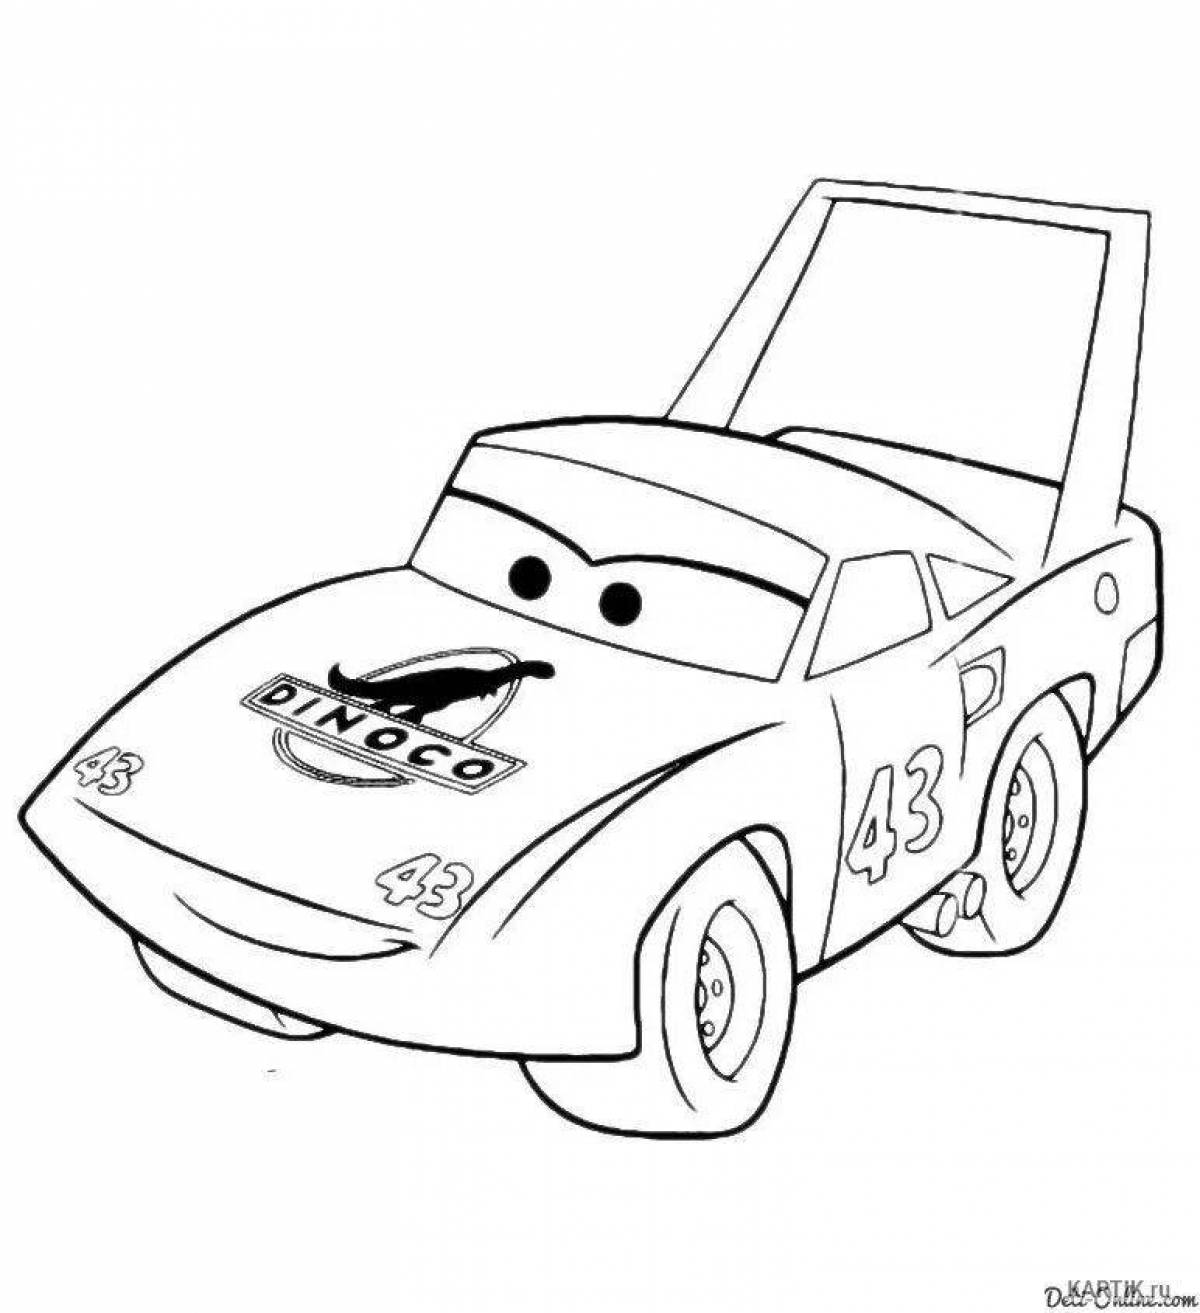 The Incredible Lightning McQueen coloring book